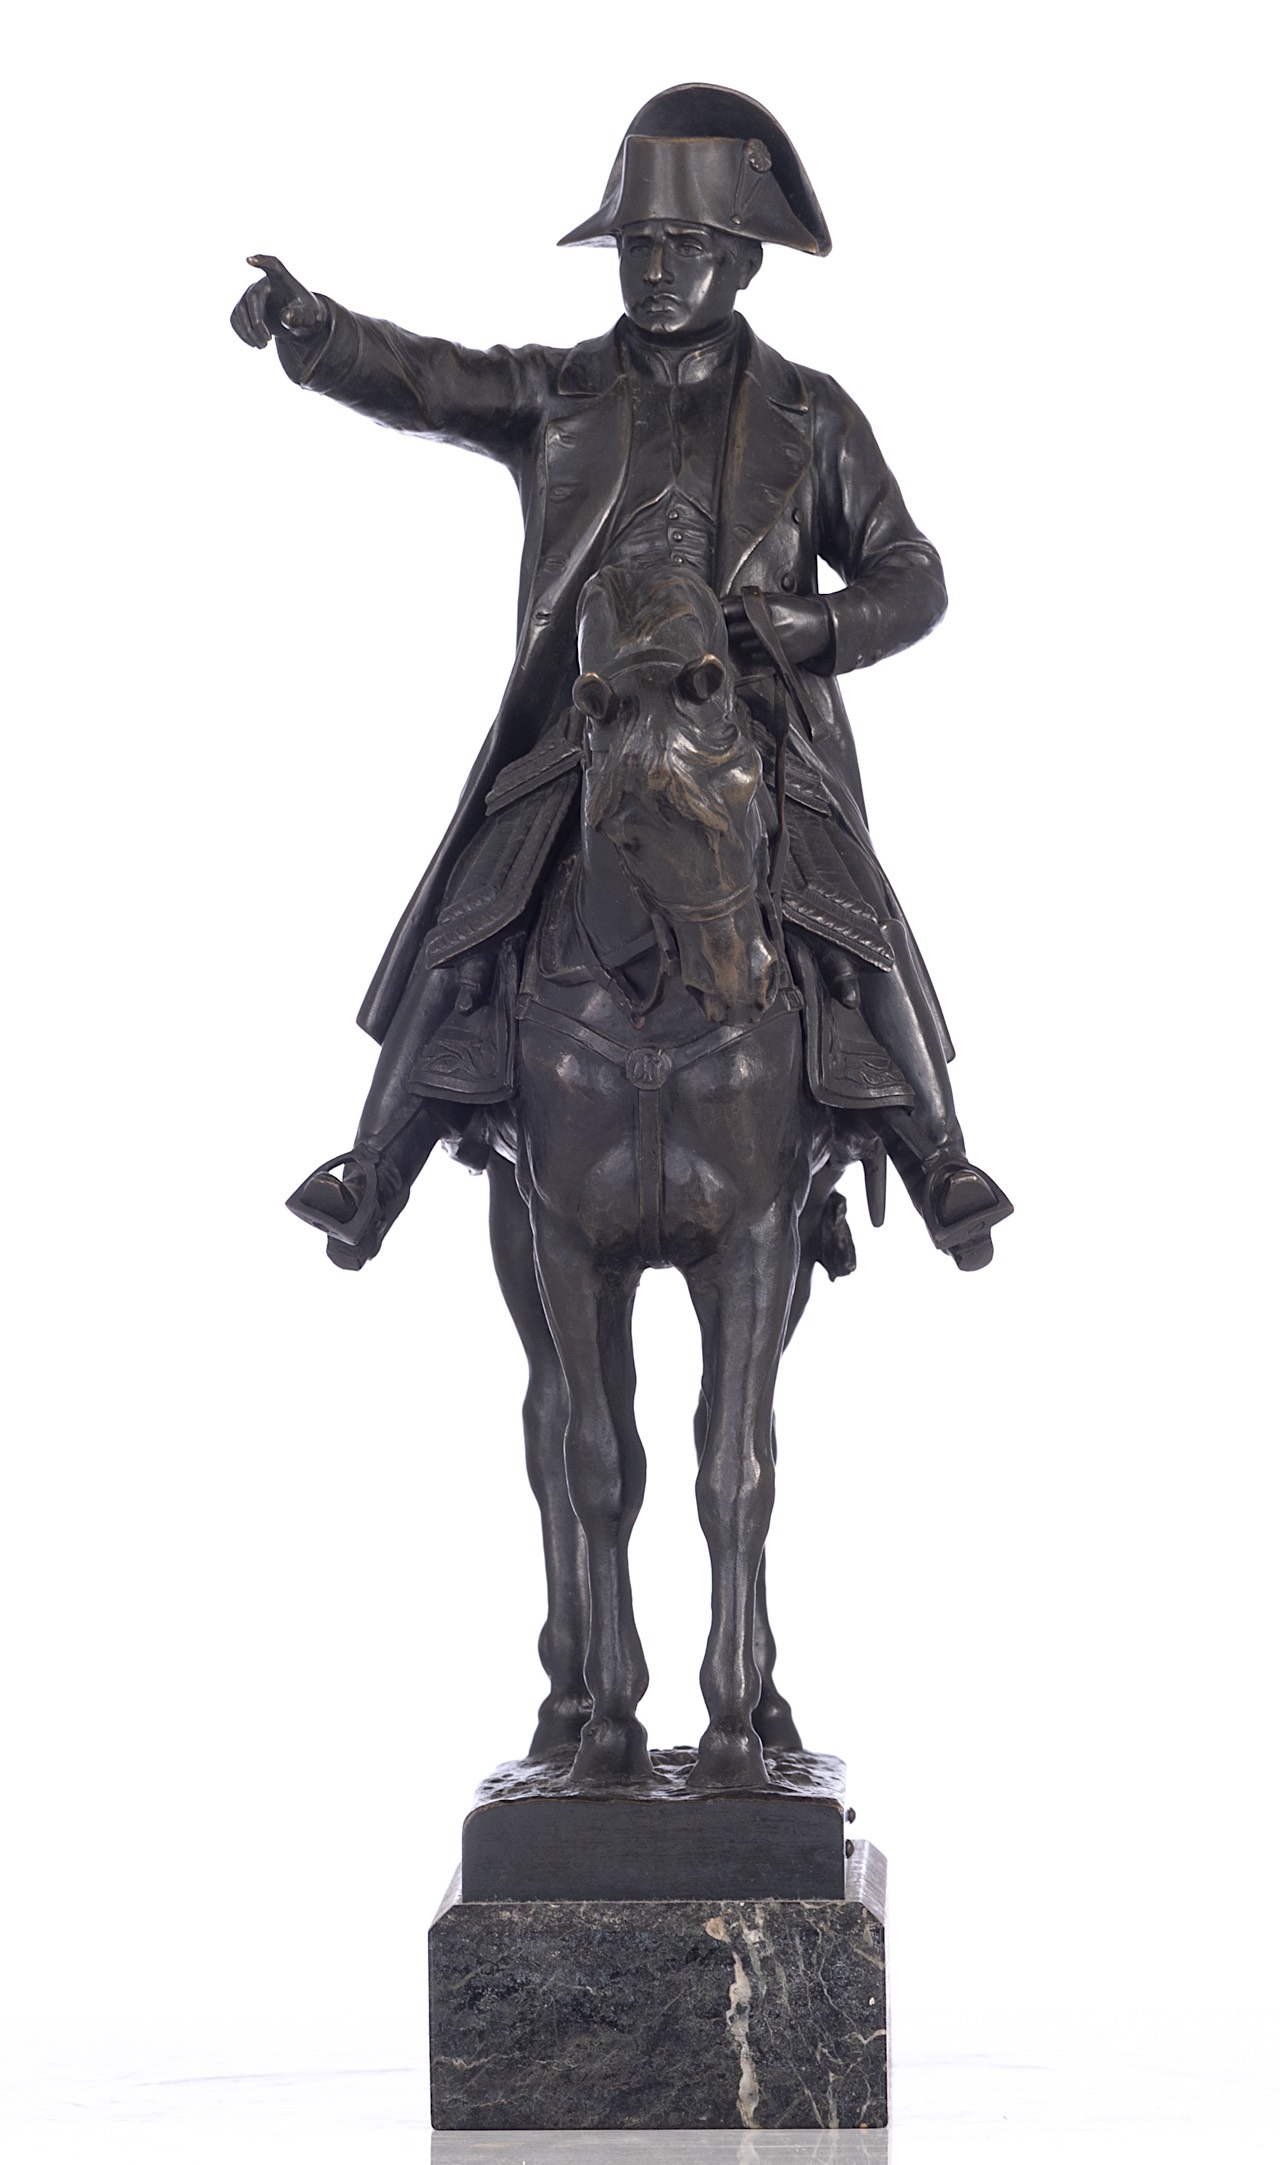 Ernest Charles Guilbert (1848-1913), Equestrian of Napoleon, 1910, patinated bronze, H 40 cm - Image 5 of 9